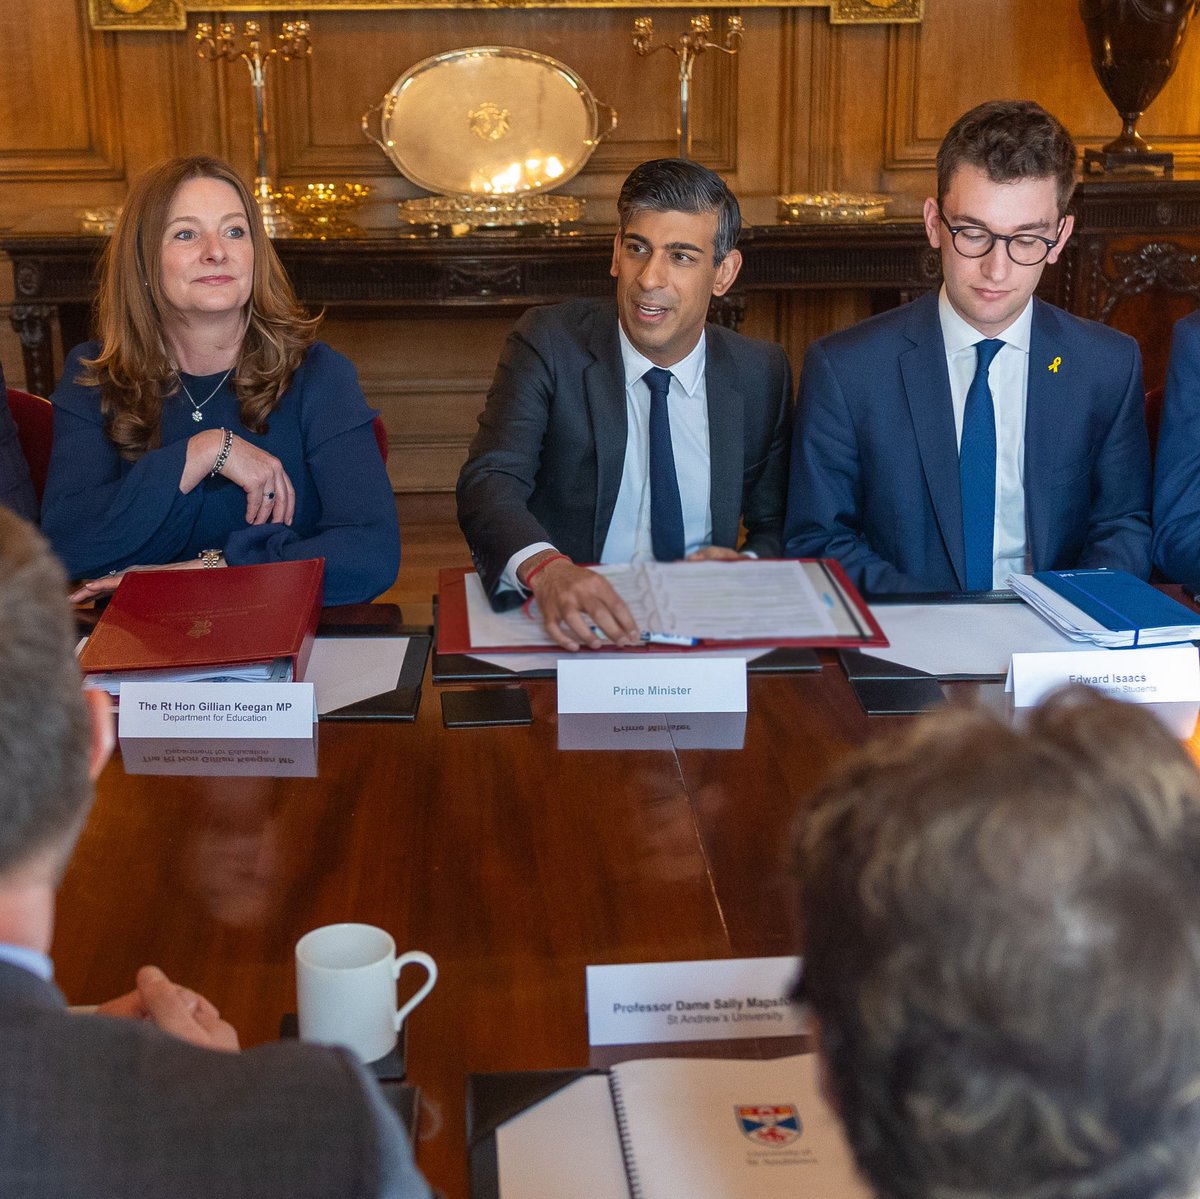 Debate and the open exchange of views in universities is essential, but it can never tip over into hate speech, harassment or violence. Today, @RishiSunak met with Vice Chancellors and Jewish students to deliver a clear message: antisemitic protests at unis are unacceptable.